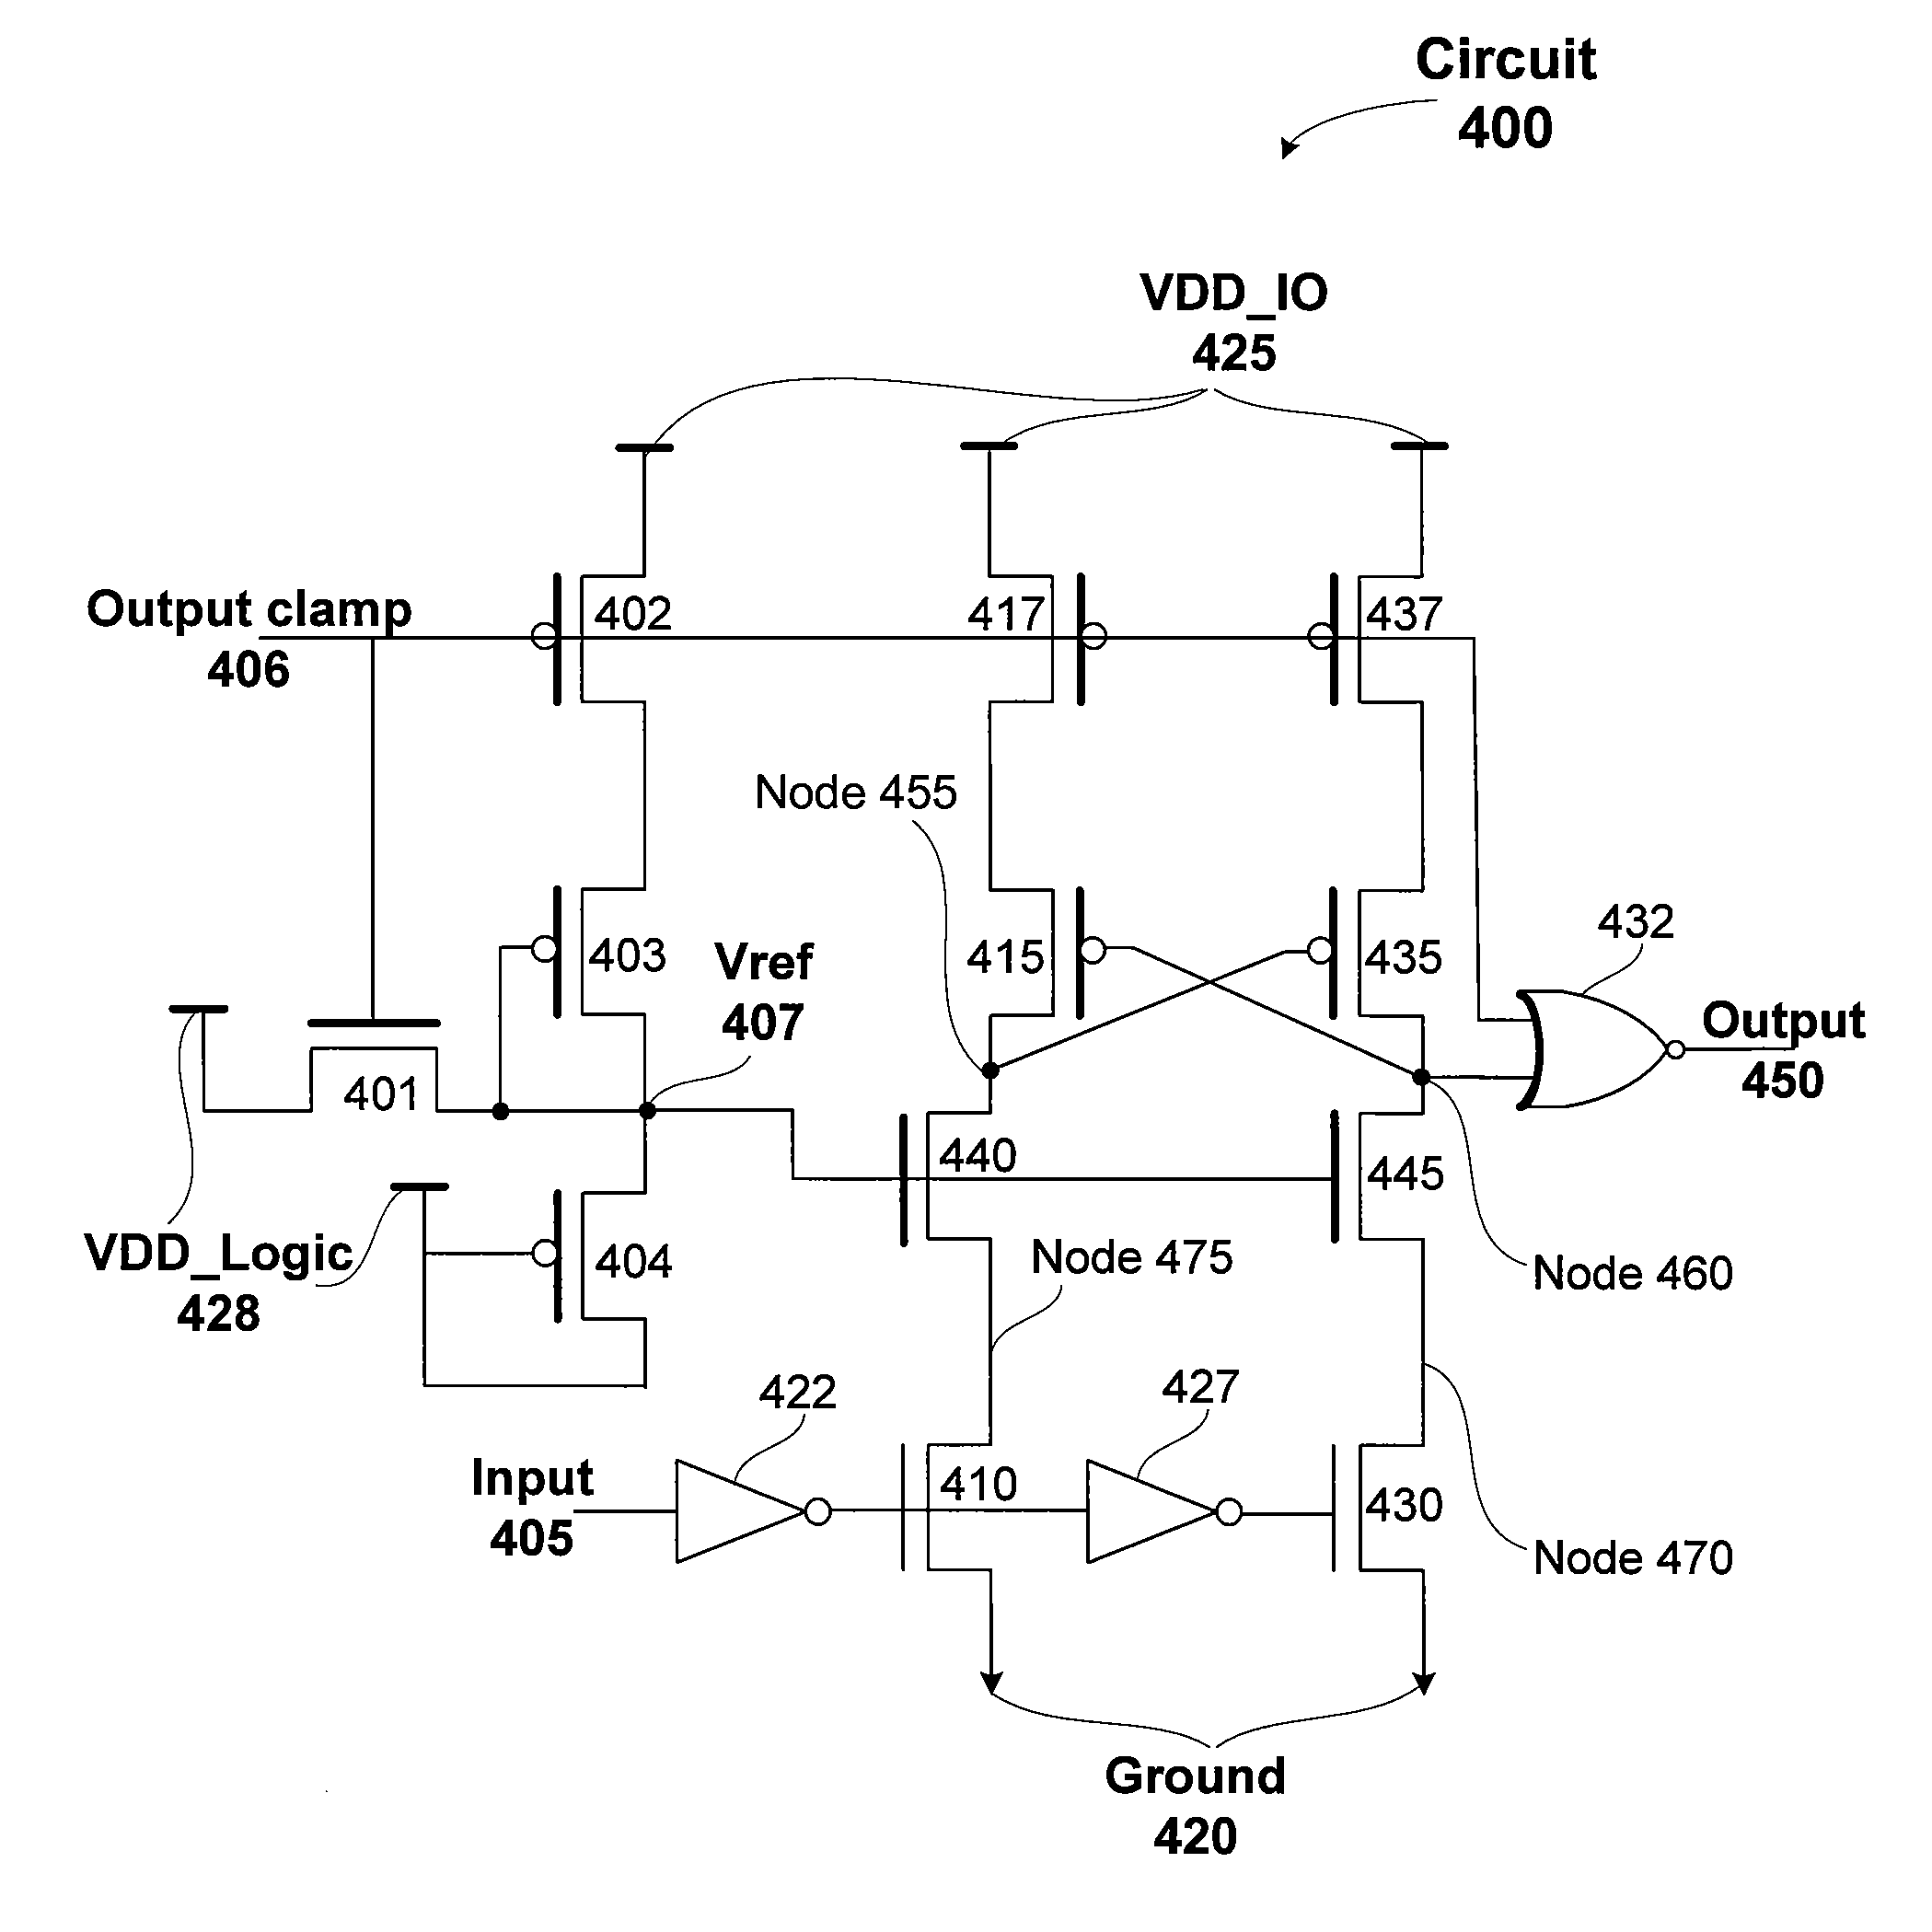 Level shifter circuit to shift signals from a logic voltage to an input/output voltage